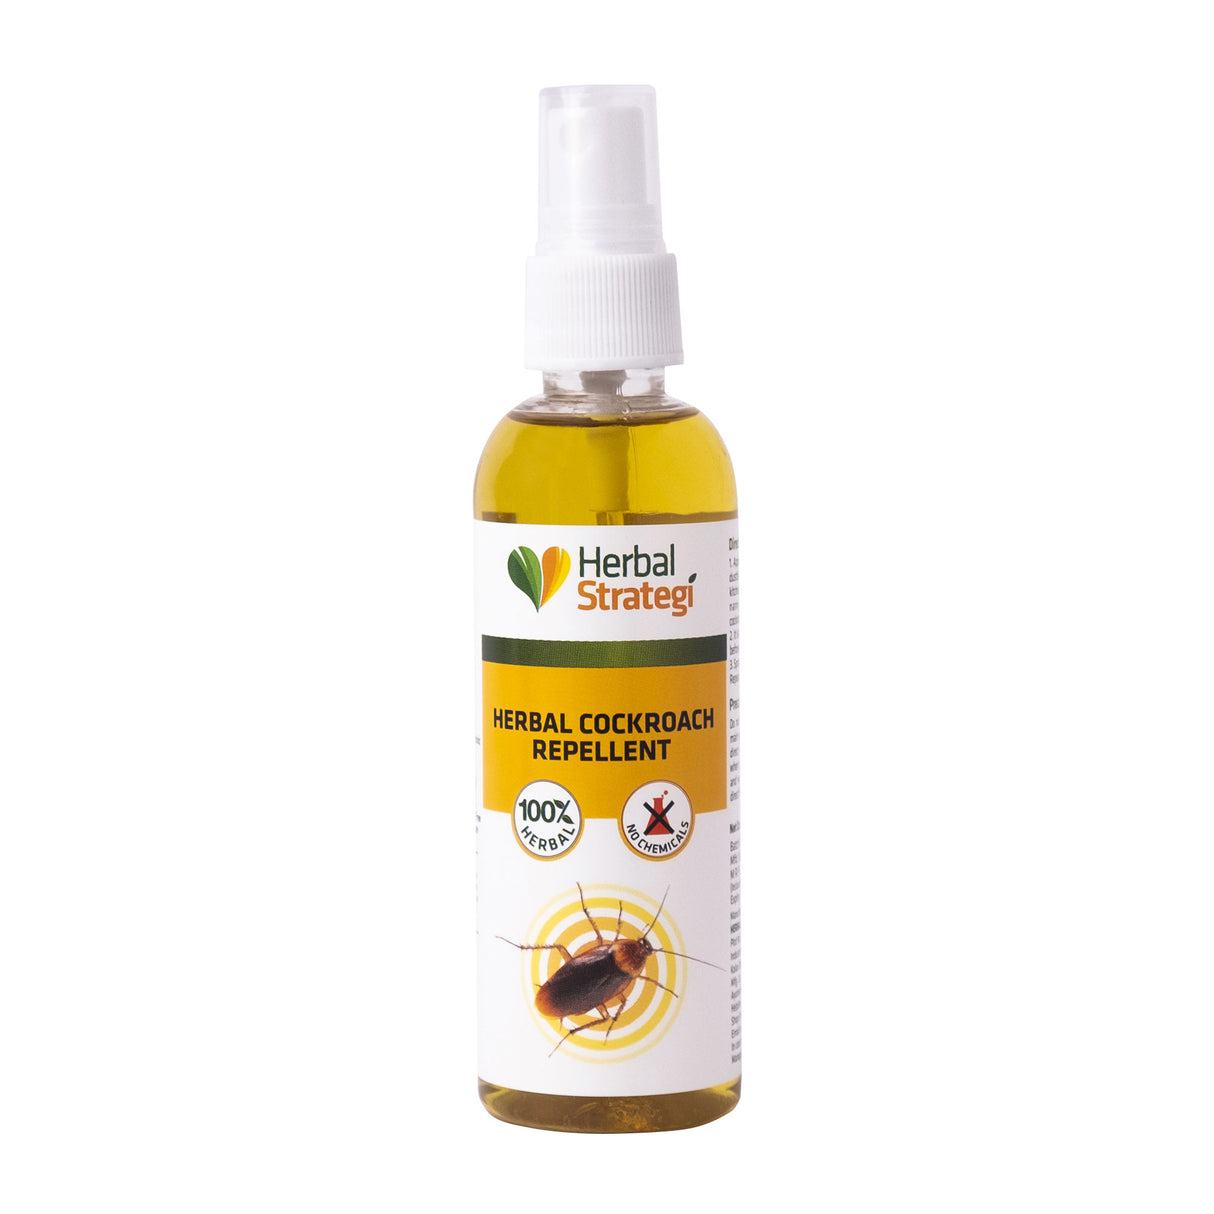 Herbal Cockroach Repellent | Pack Size: 100 ml, 200 ml, 500 ml, 5 ltrs